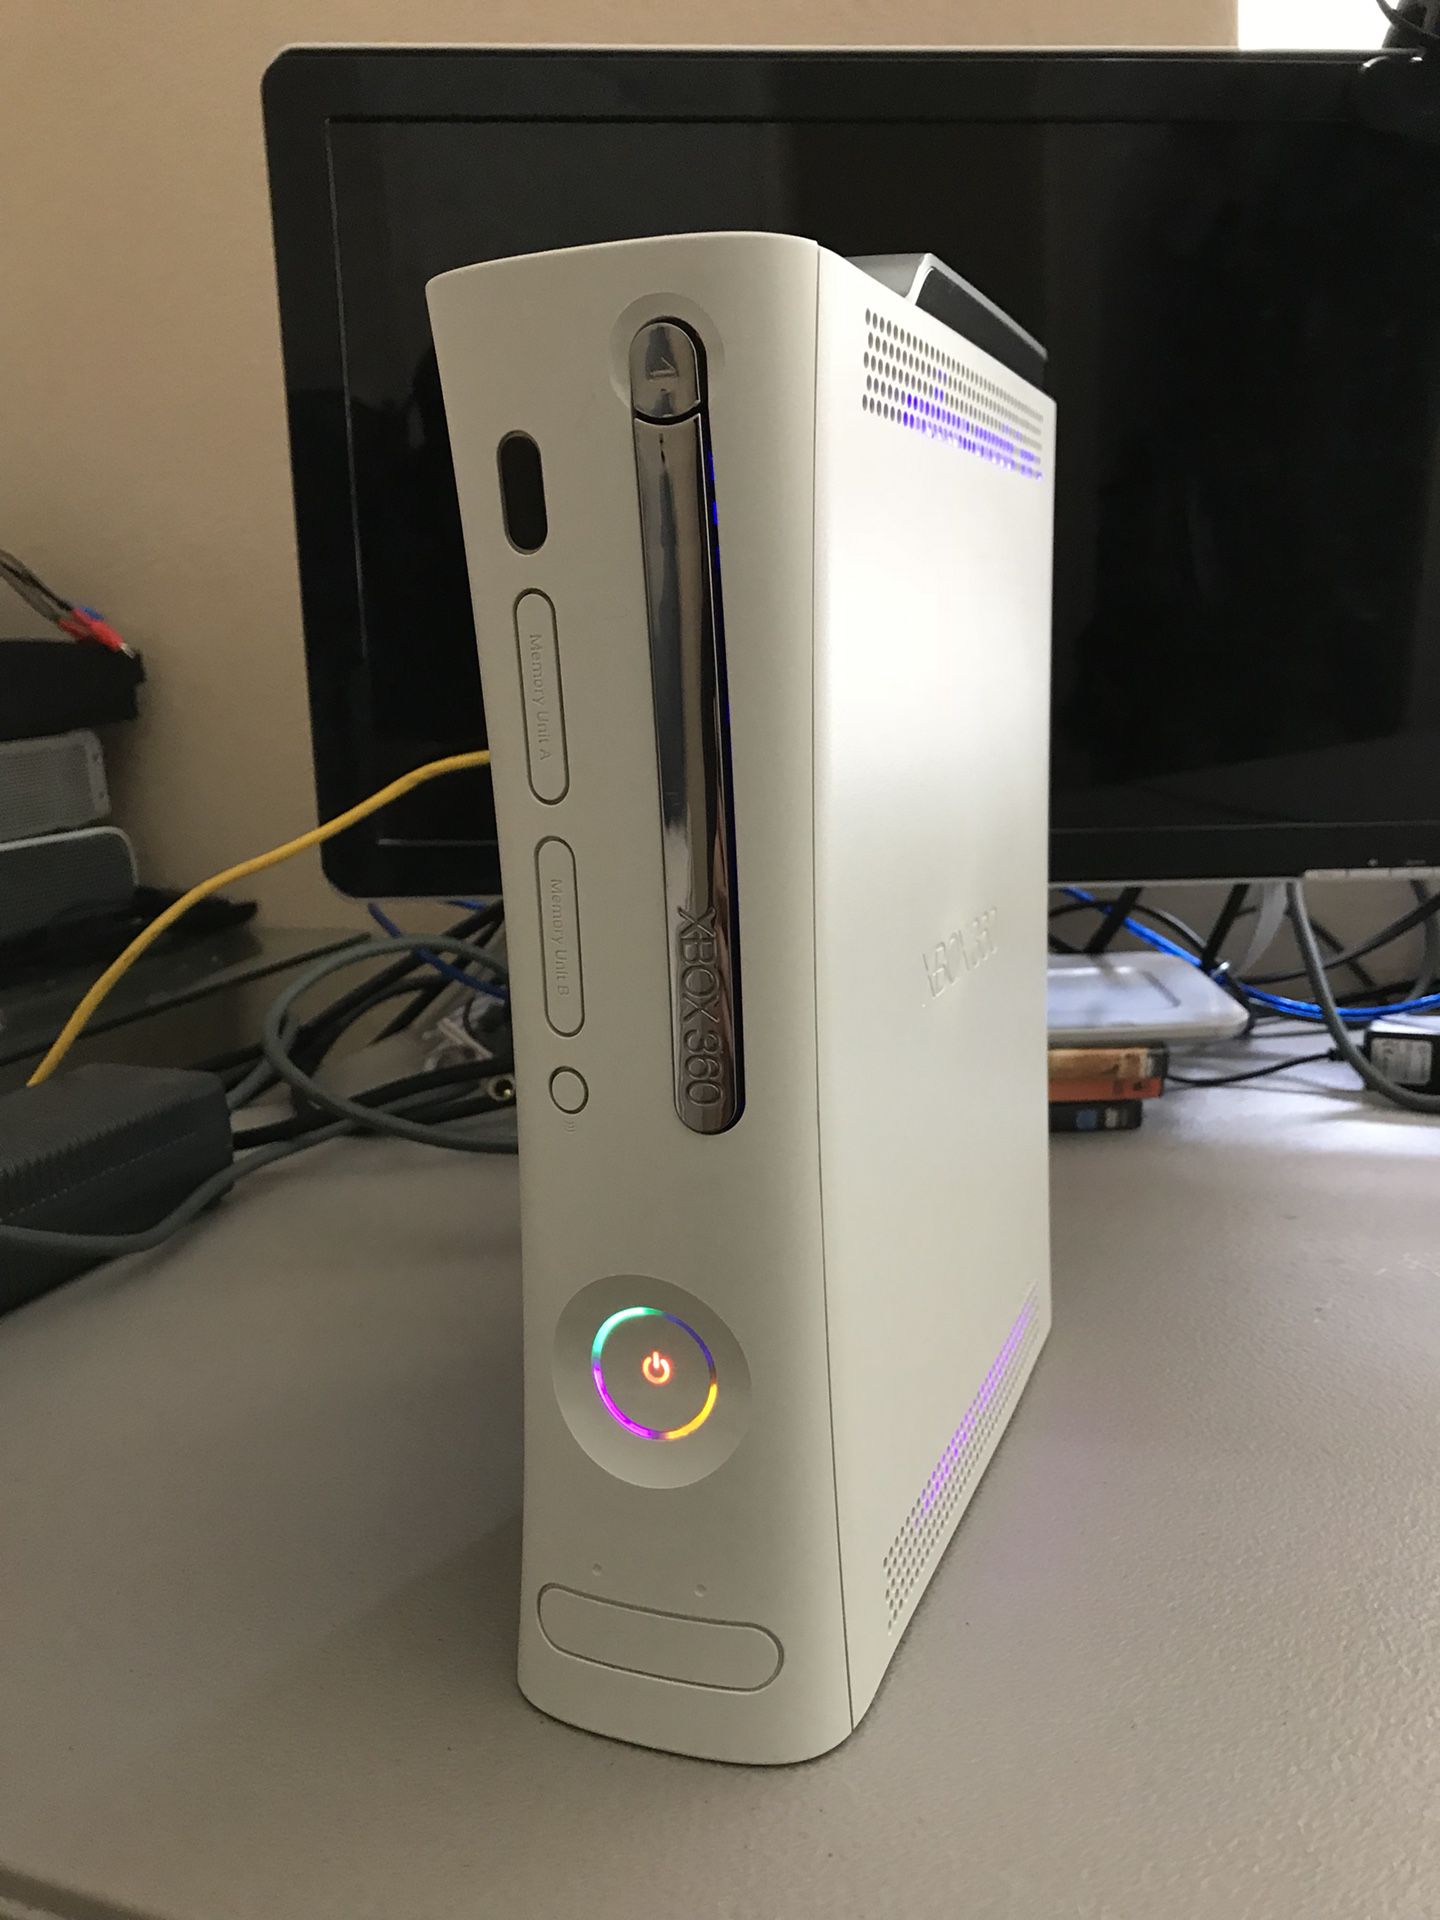 Xbox 360 rgh 2.0 for Sale in Charlotte, NC - OfferUp